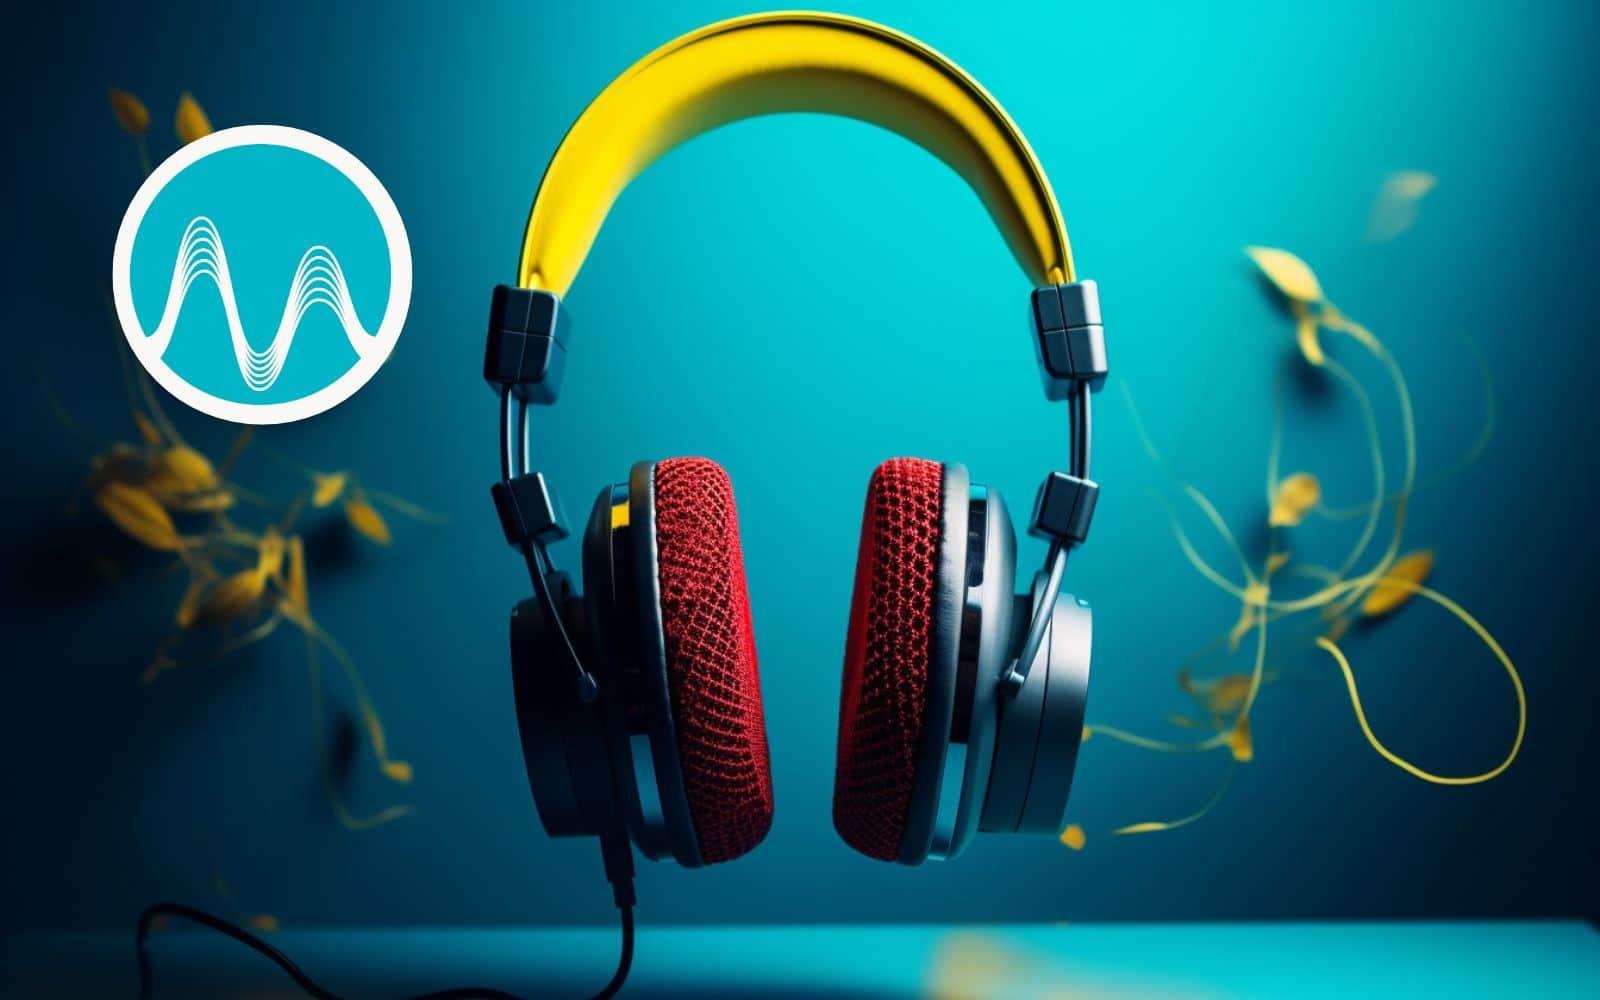 How To Make Your Own Podcast Intro For Free - Adobe Audition + Ai Tools - Step By Step Tutorial